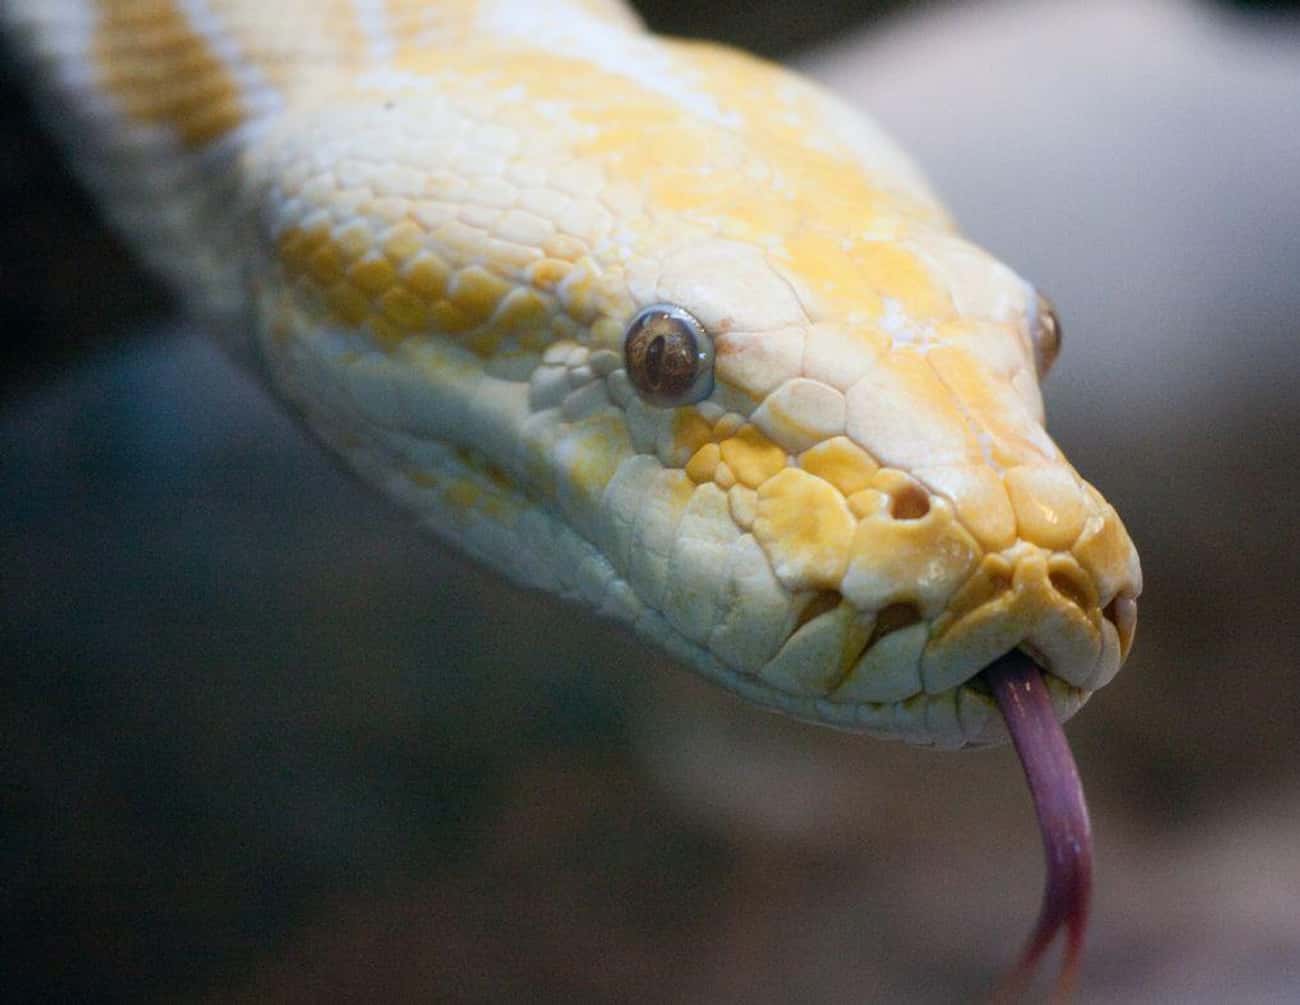 A Florida Couple Was Charged With Murder After Their Python Killed Their Two-Year-Old Daughter